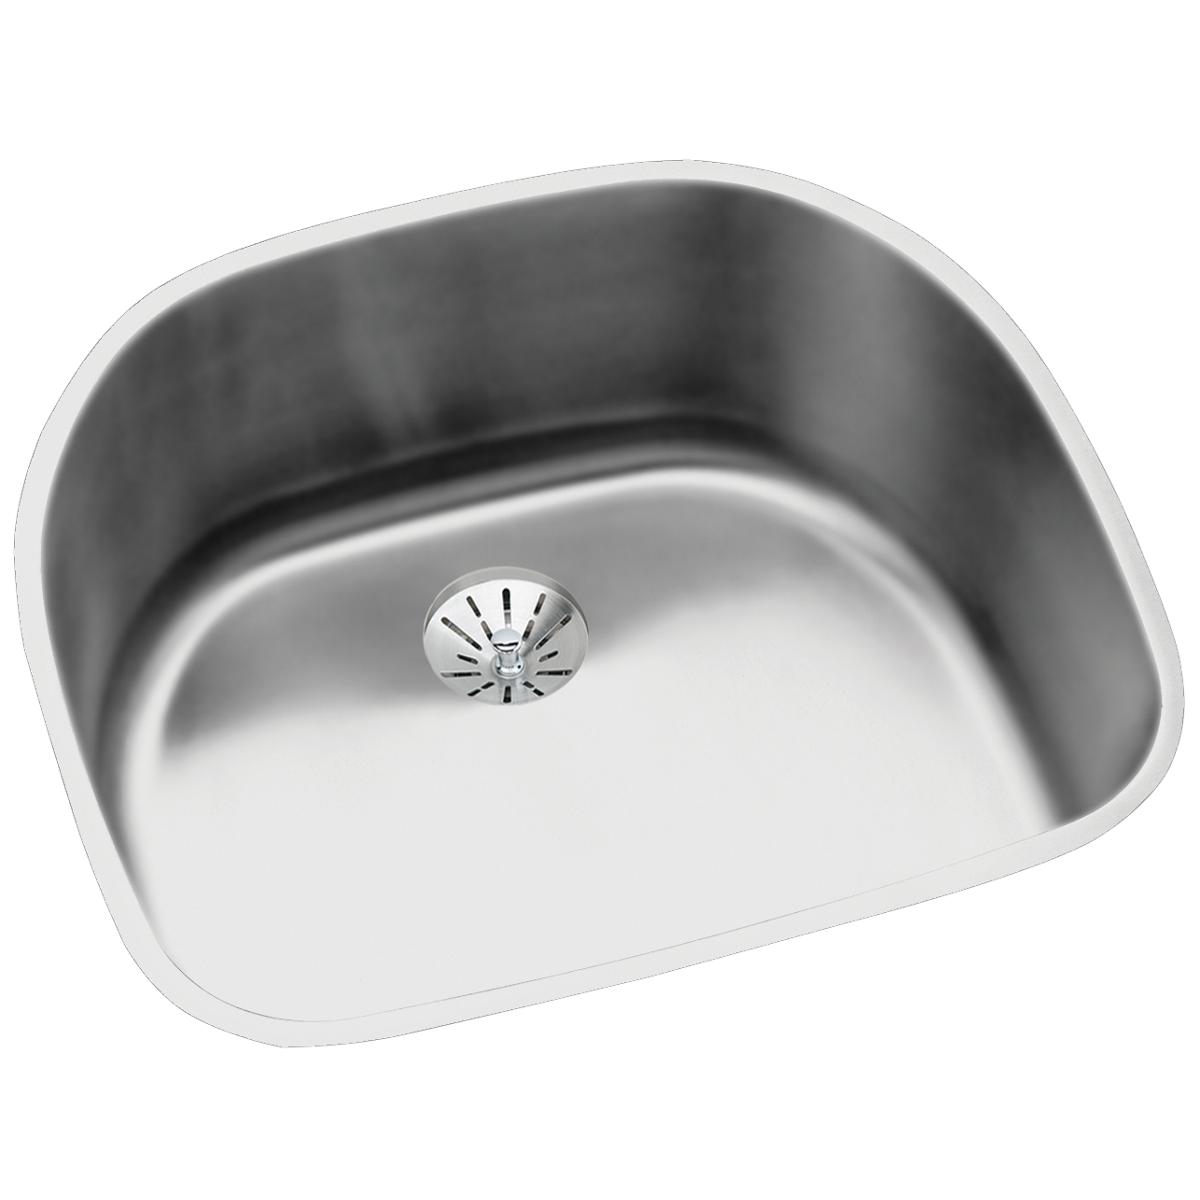 Elkay Lustertone Classic Stainless Steel 23-5/8" x 21-1/4" x 10" Single Bowl Undermount Sink with Perfect Drain